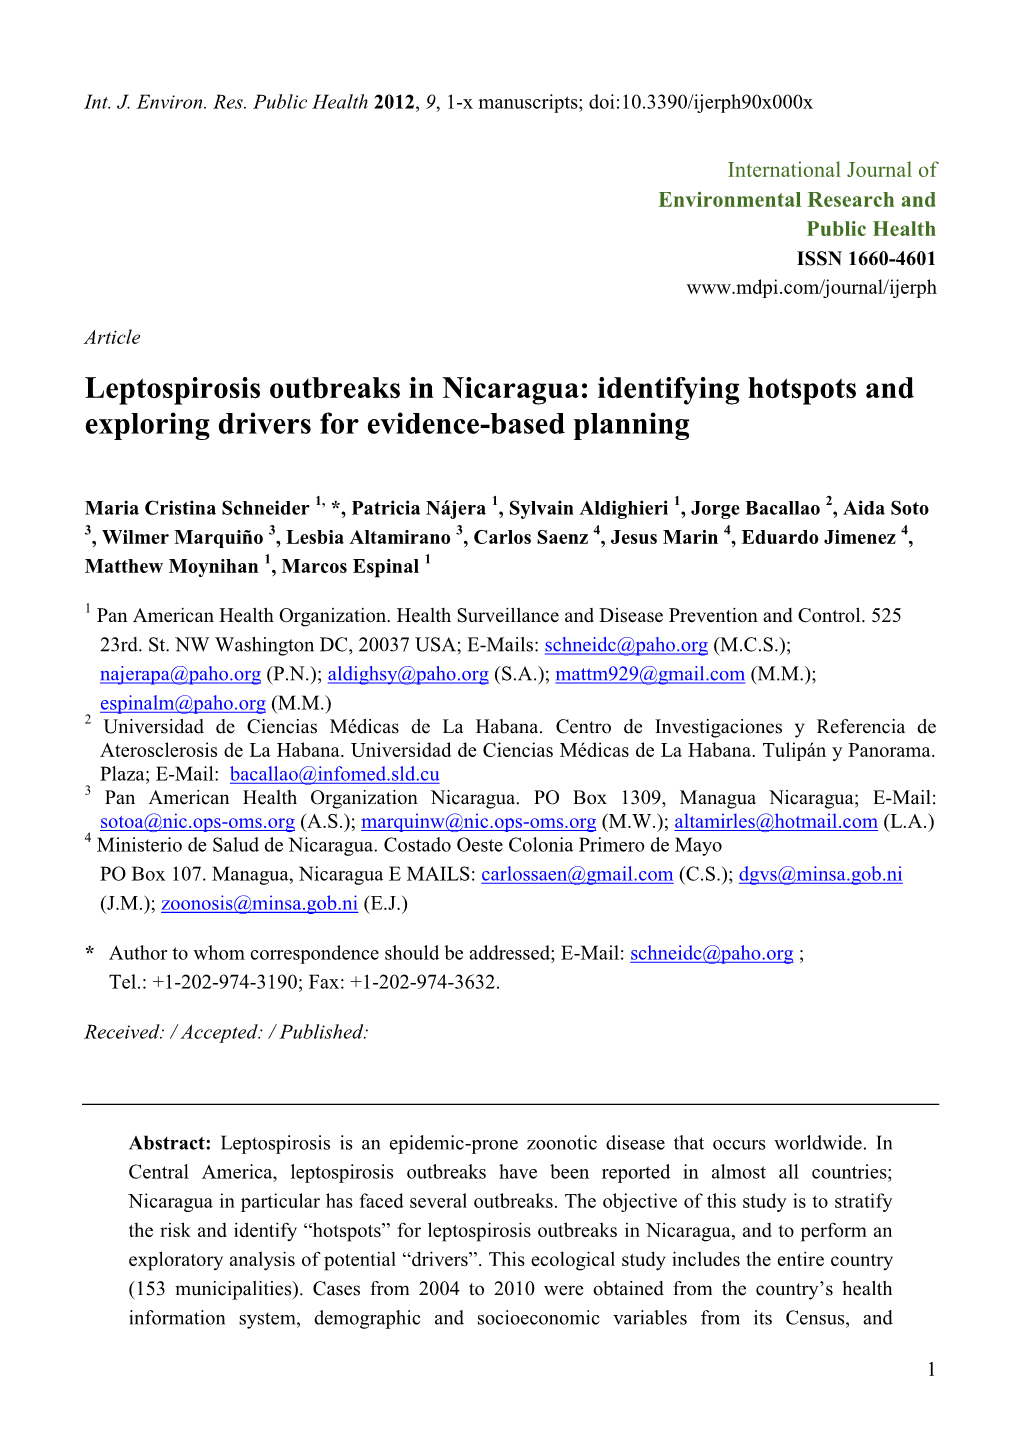 Leptospirosis Outbreaks in Nicaragua: Identifying Hotspots and Exploring Drivers for Evidence-Based Planning